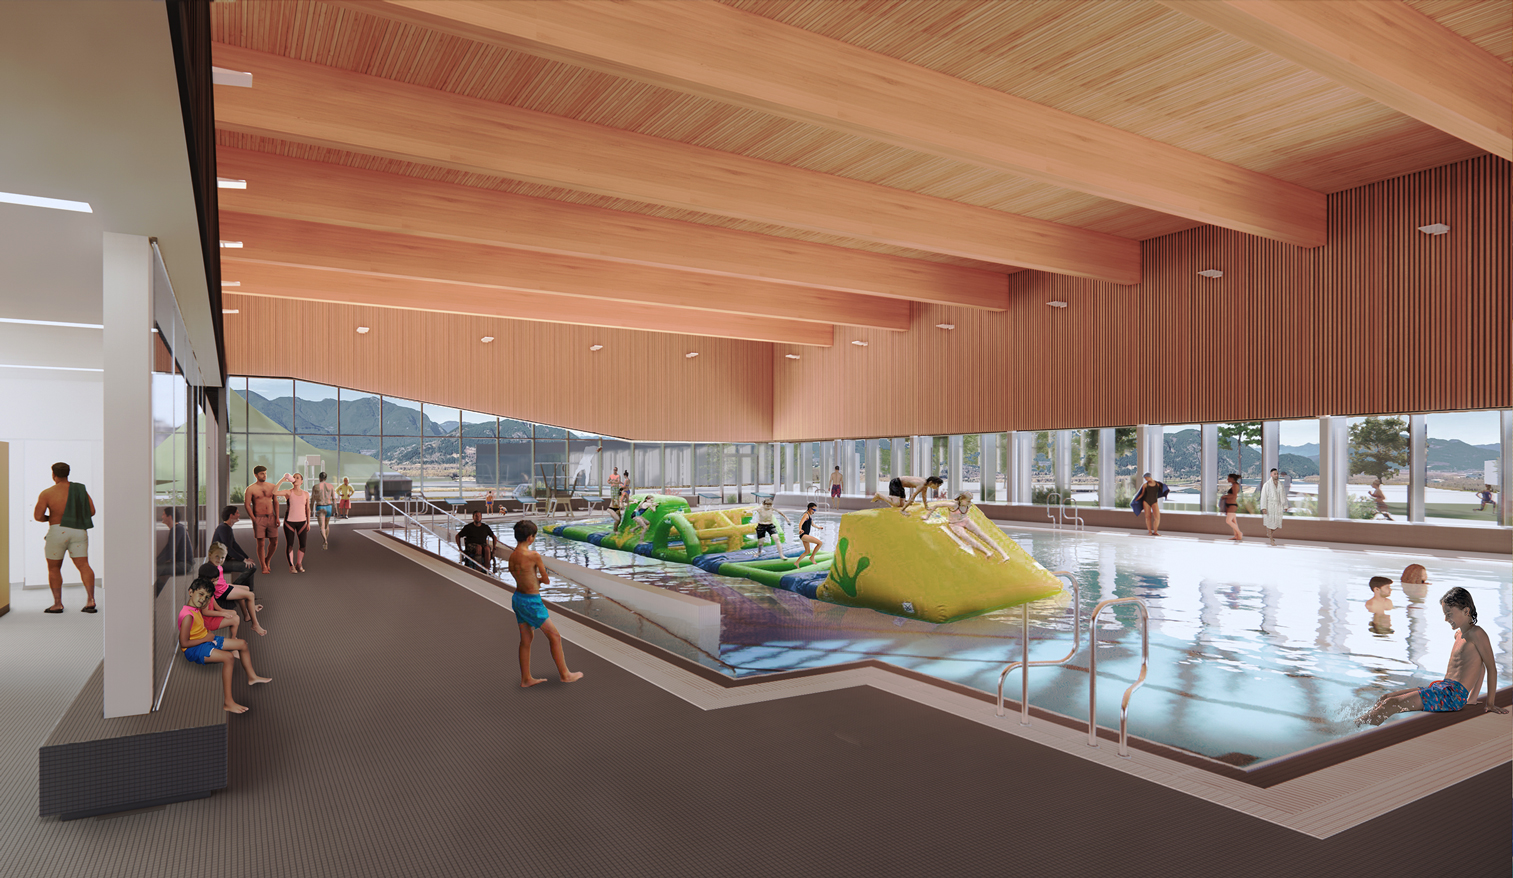 Rendering of families enjoying the leisure pool at the Golden Aquatic Centre indoor pool. Wood ceilings and beams add warmth to the space, while the large windows provide full views of the mountains.